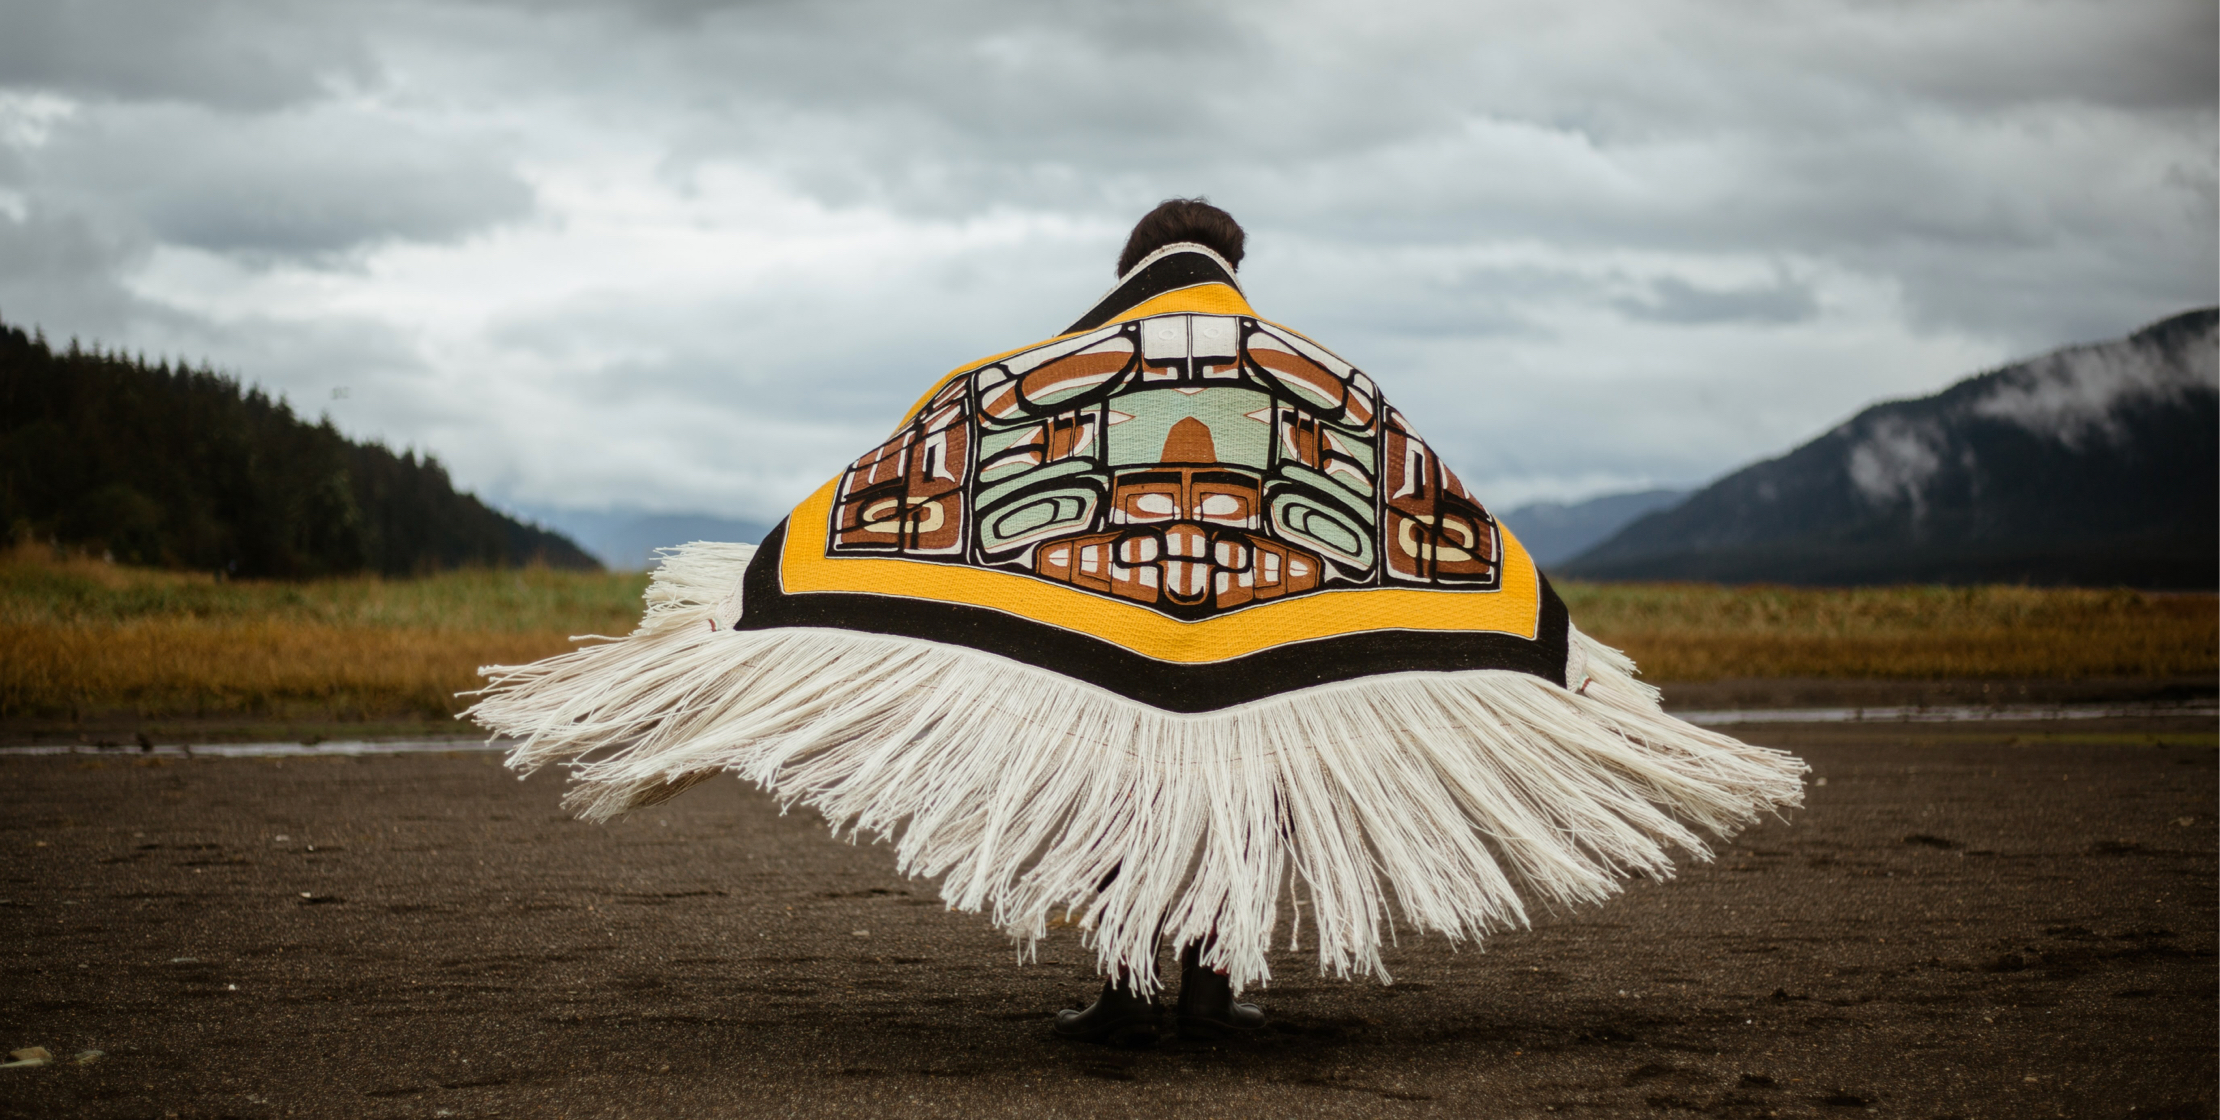 A woman with her back to the camera wears a floor-length fringed blanket wrapped around her shoulders in a cloudy landscape. 